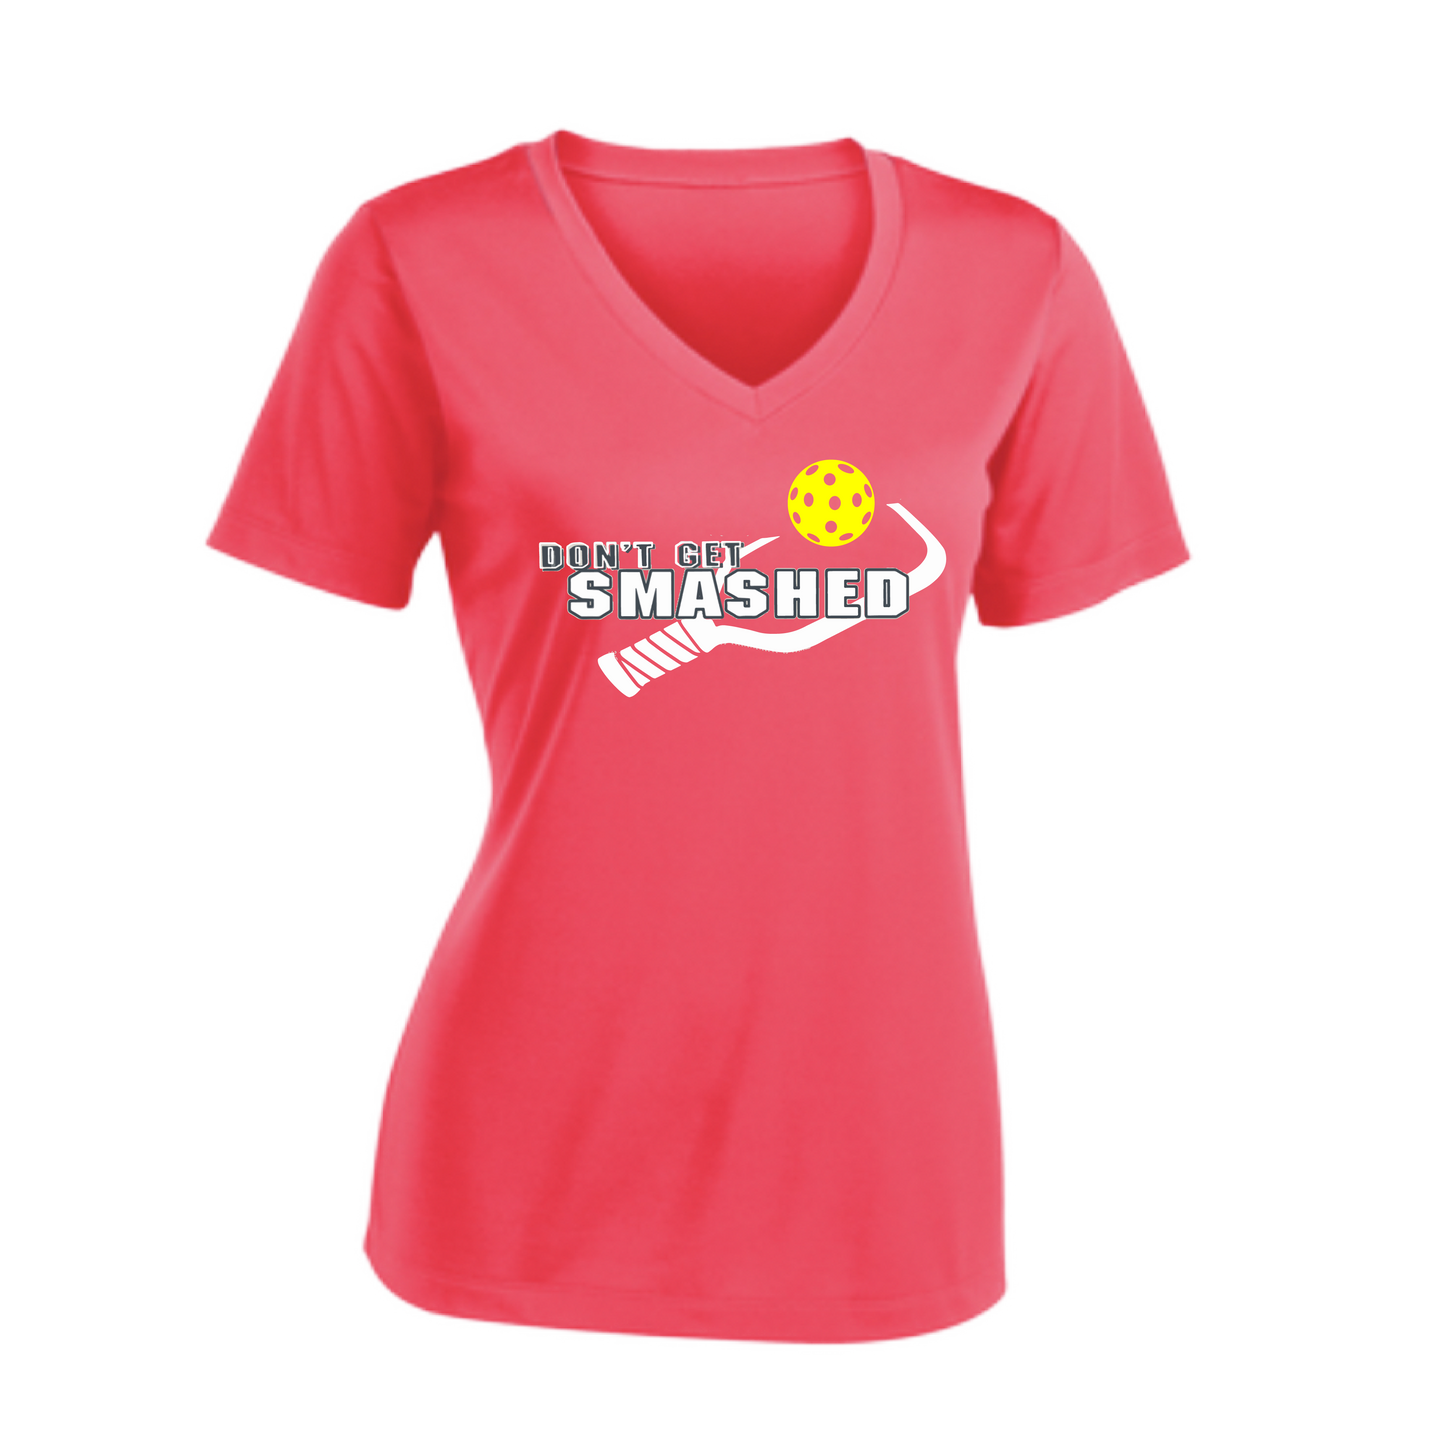 This Women's pickleball shirt offers a supreme blend of softness and style. Its moisture-wicking fabric is lightweight and breathable, while PosiCharge technology ensures long-lasting colors. Enjoy ultimate comfort and wearability.